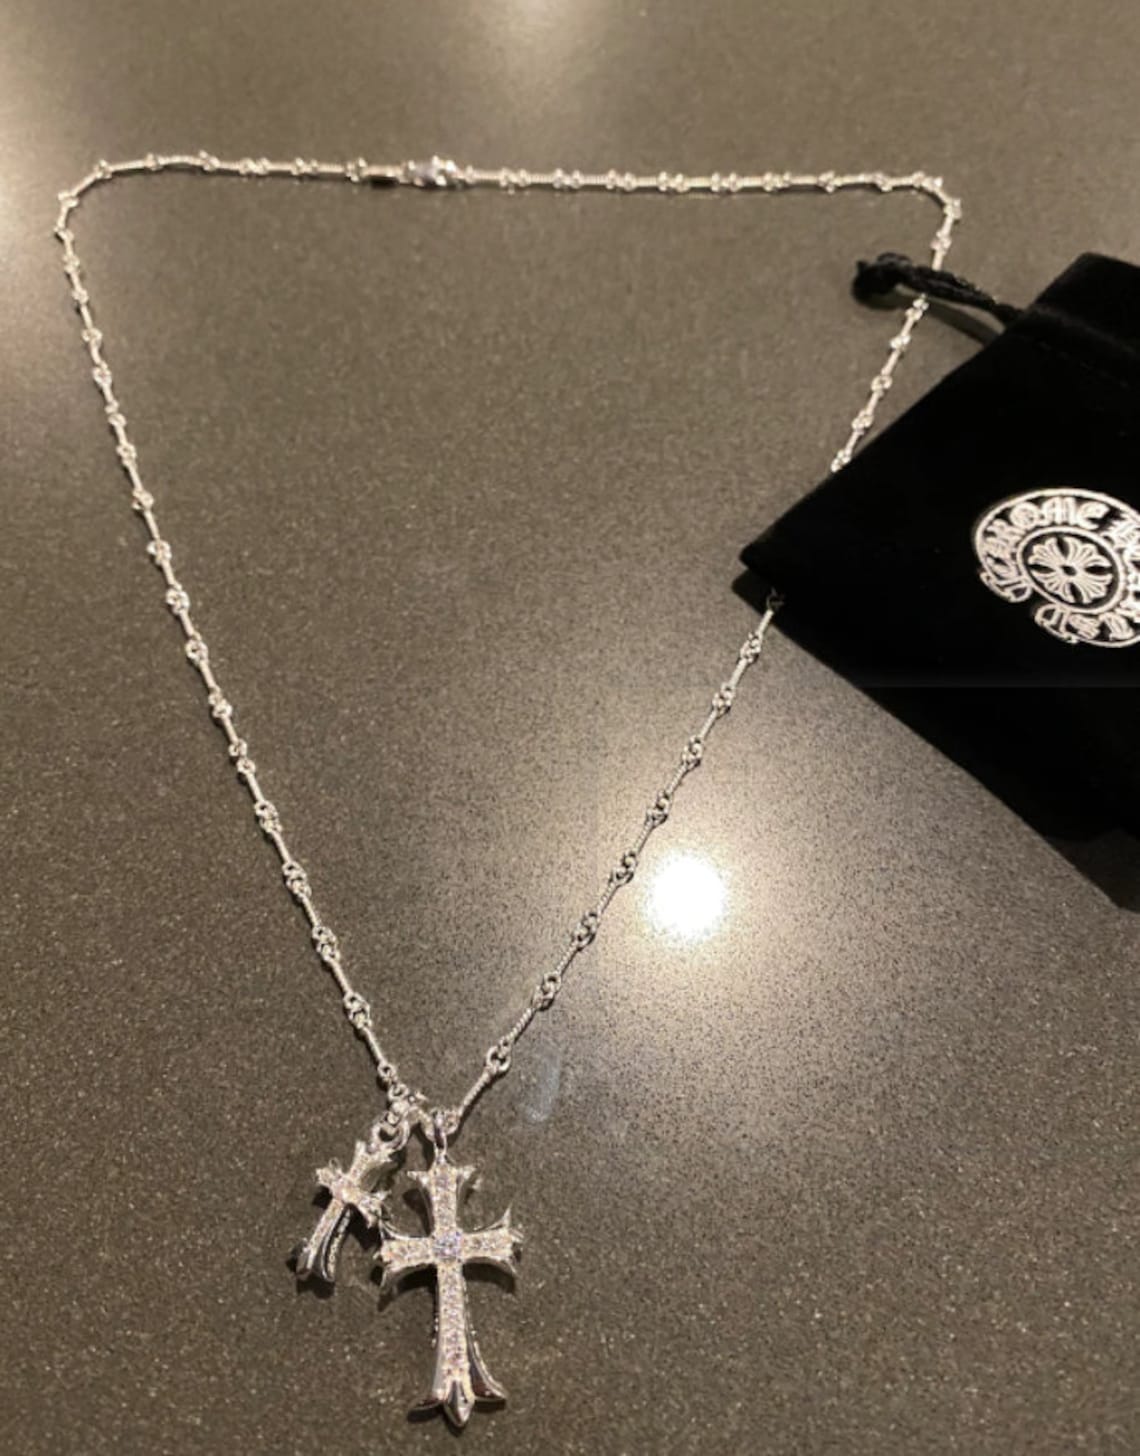 Chrome Hearts necklace cross style is very design cool and | Etsy